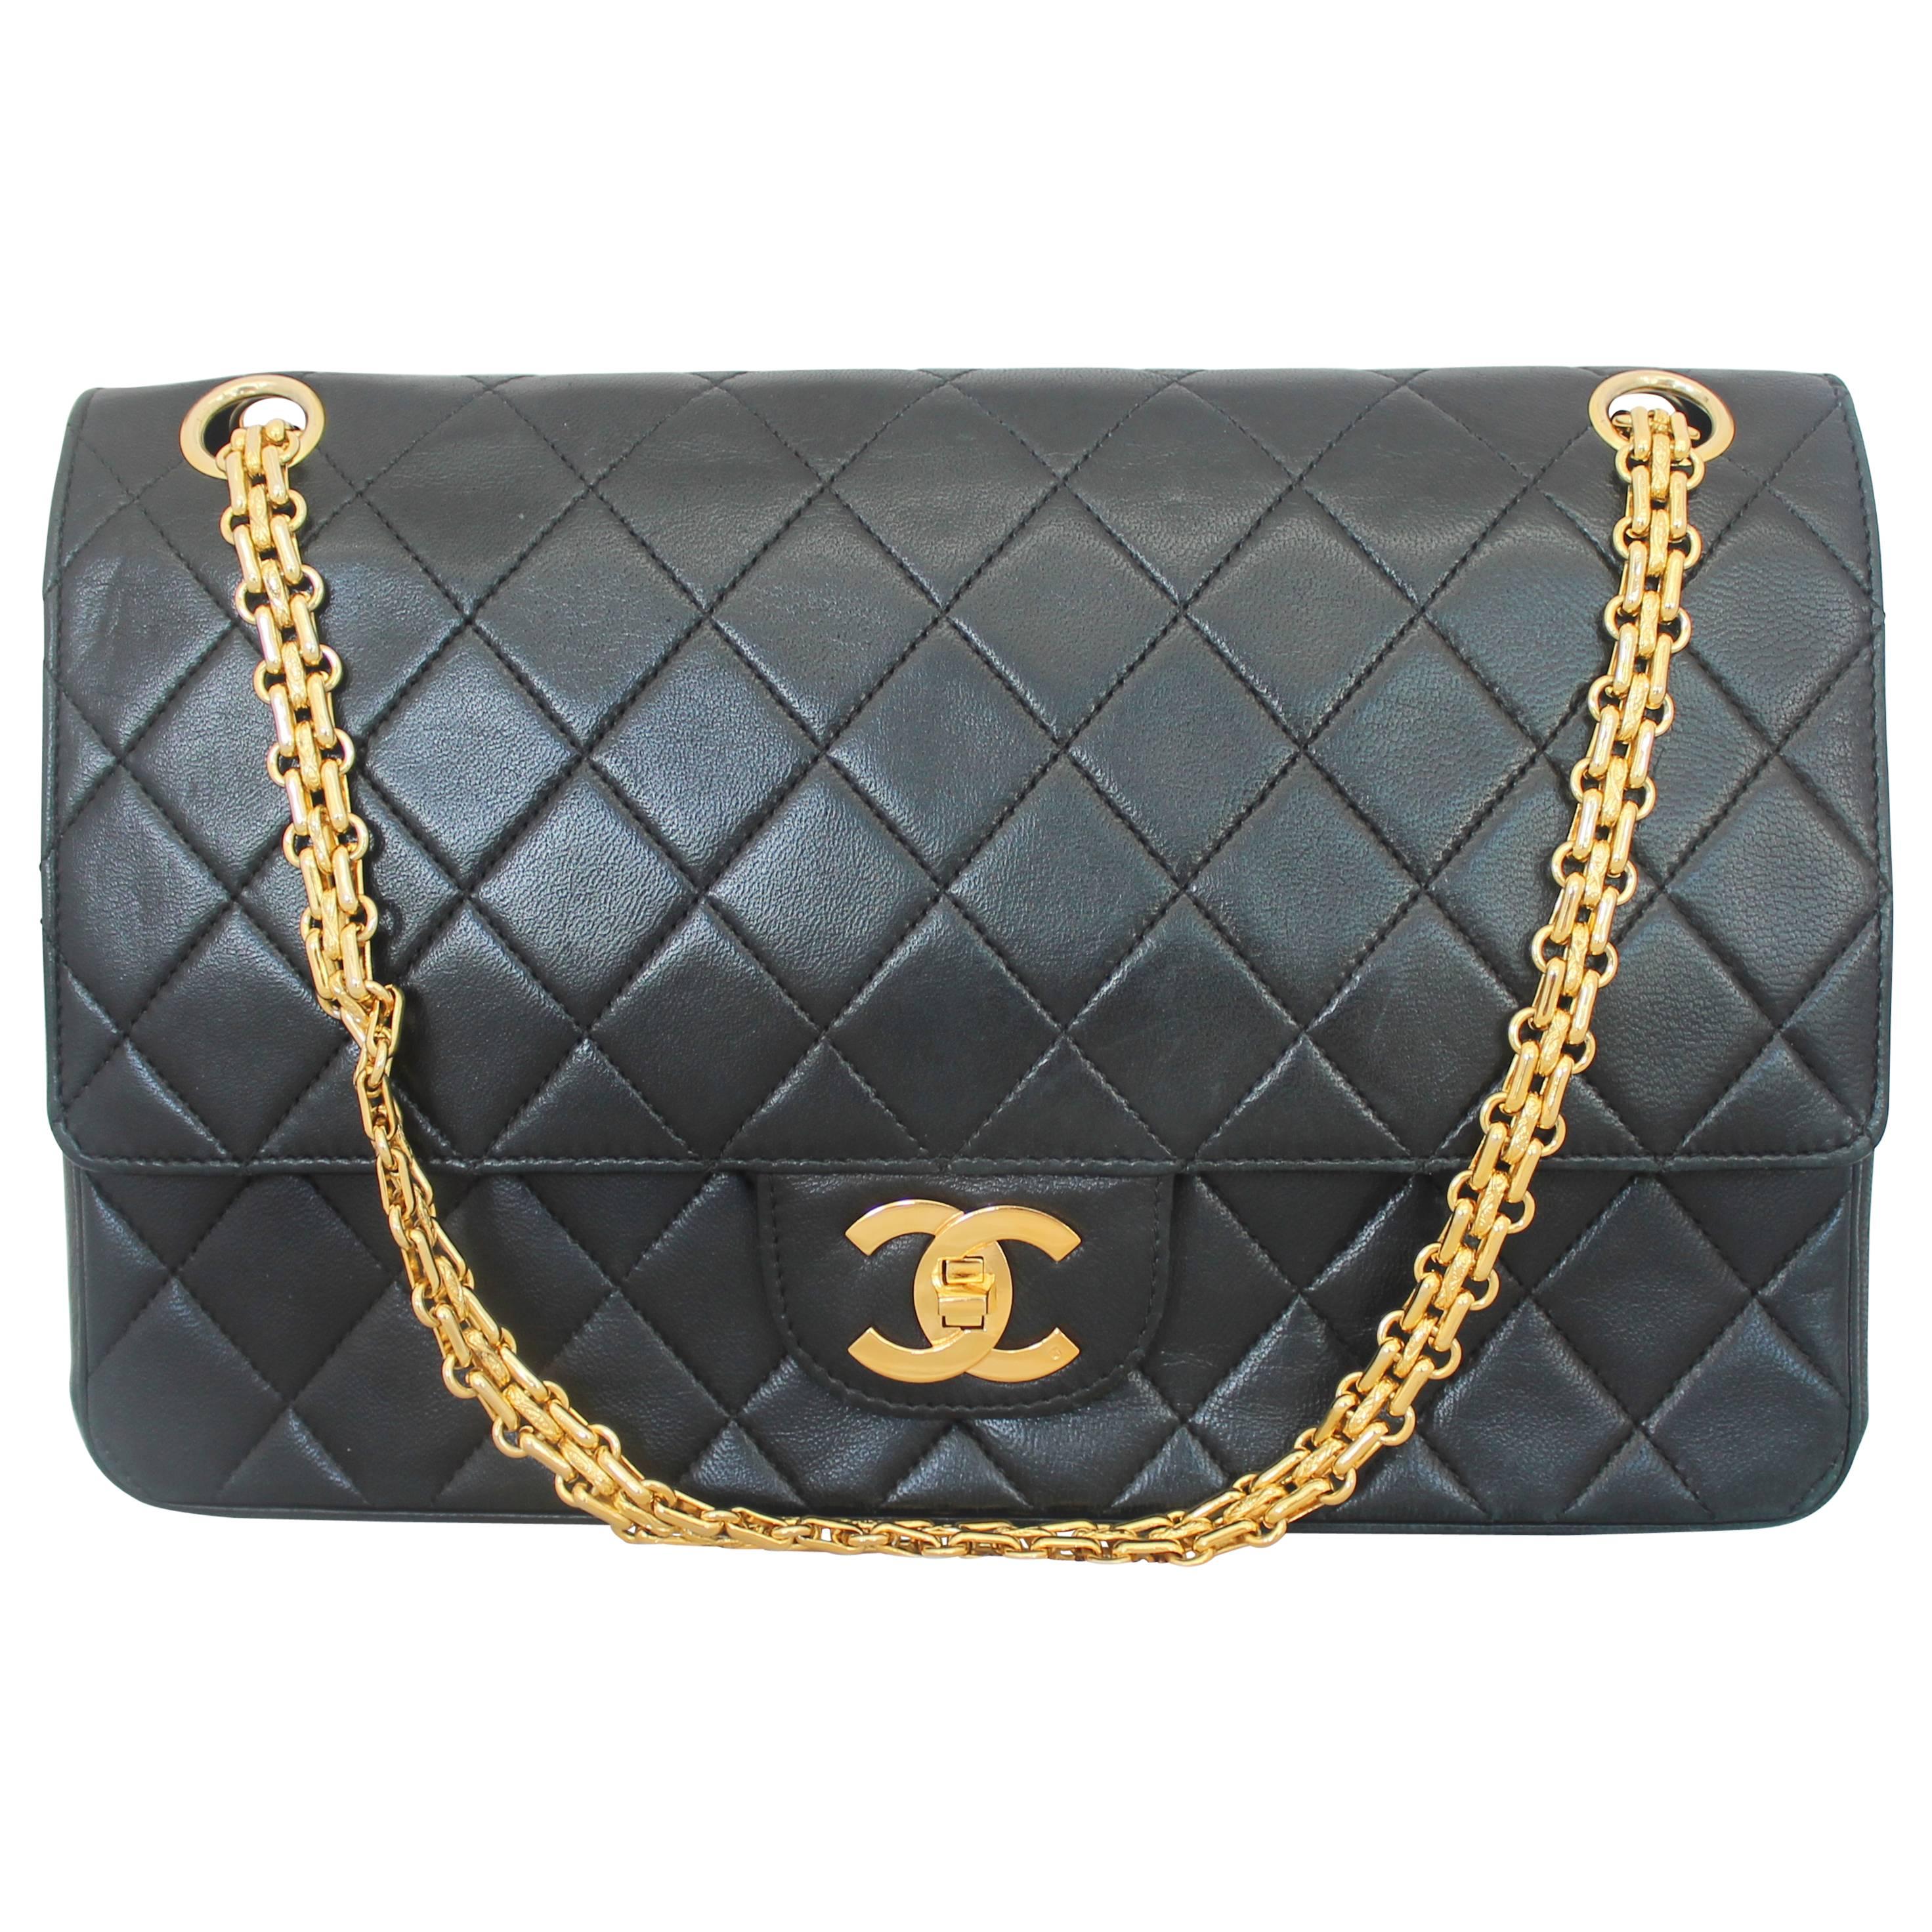 Chanel Black Quilted Lambskin Classic Double Flap Handbag - GHW - Circa 1980's